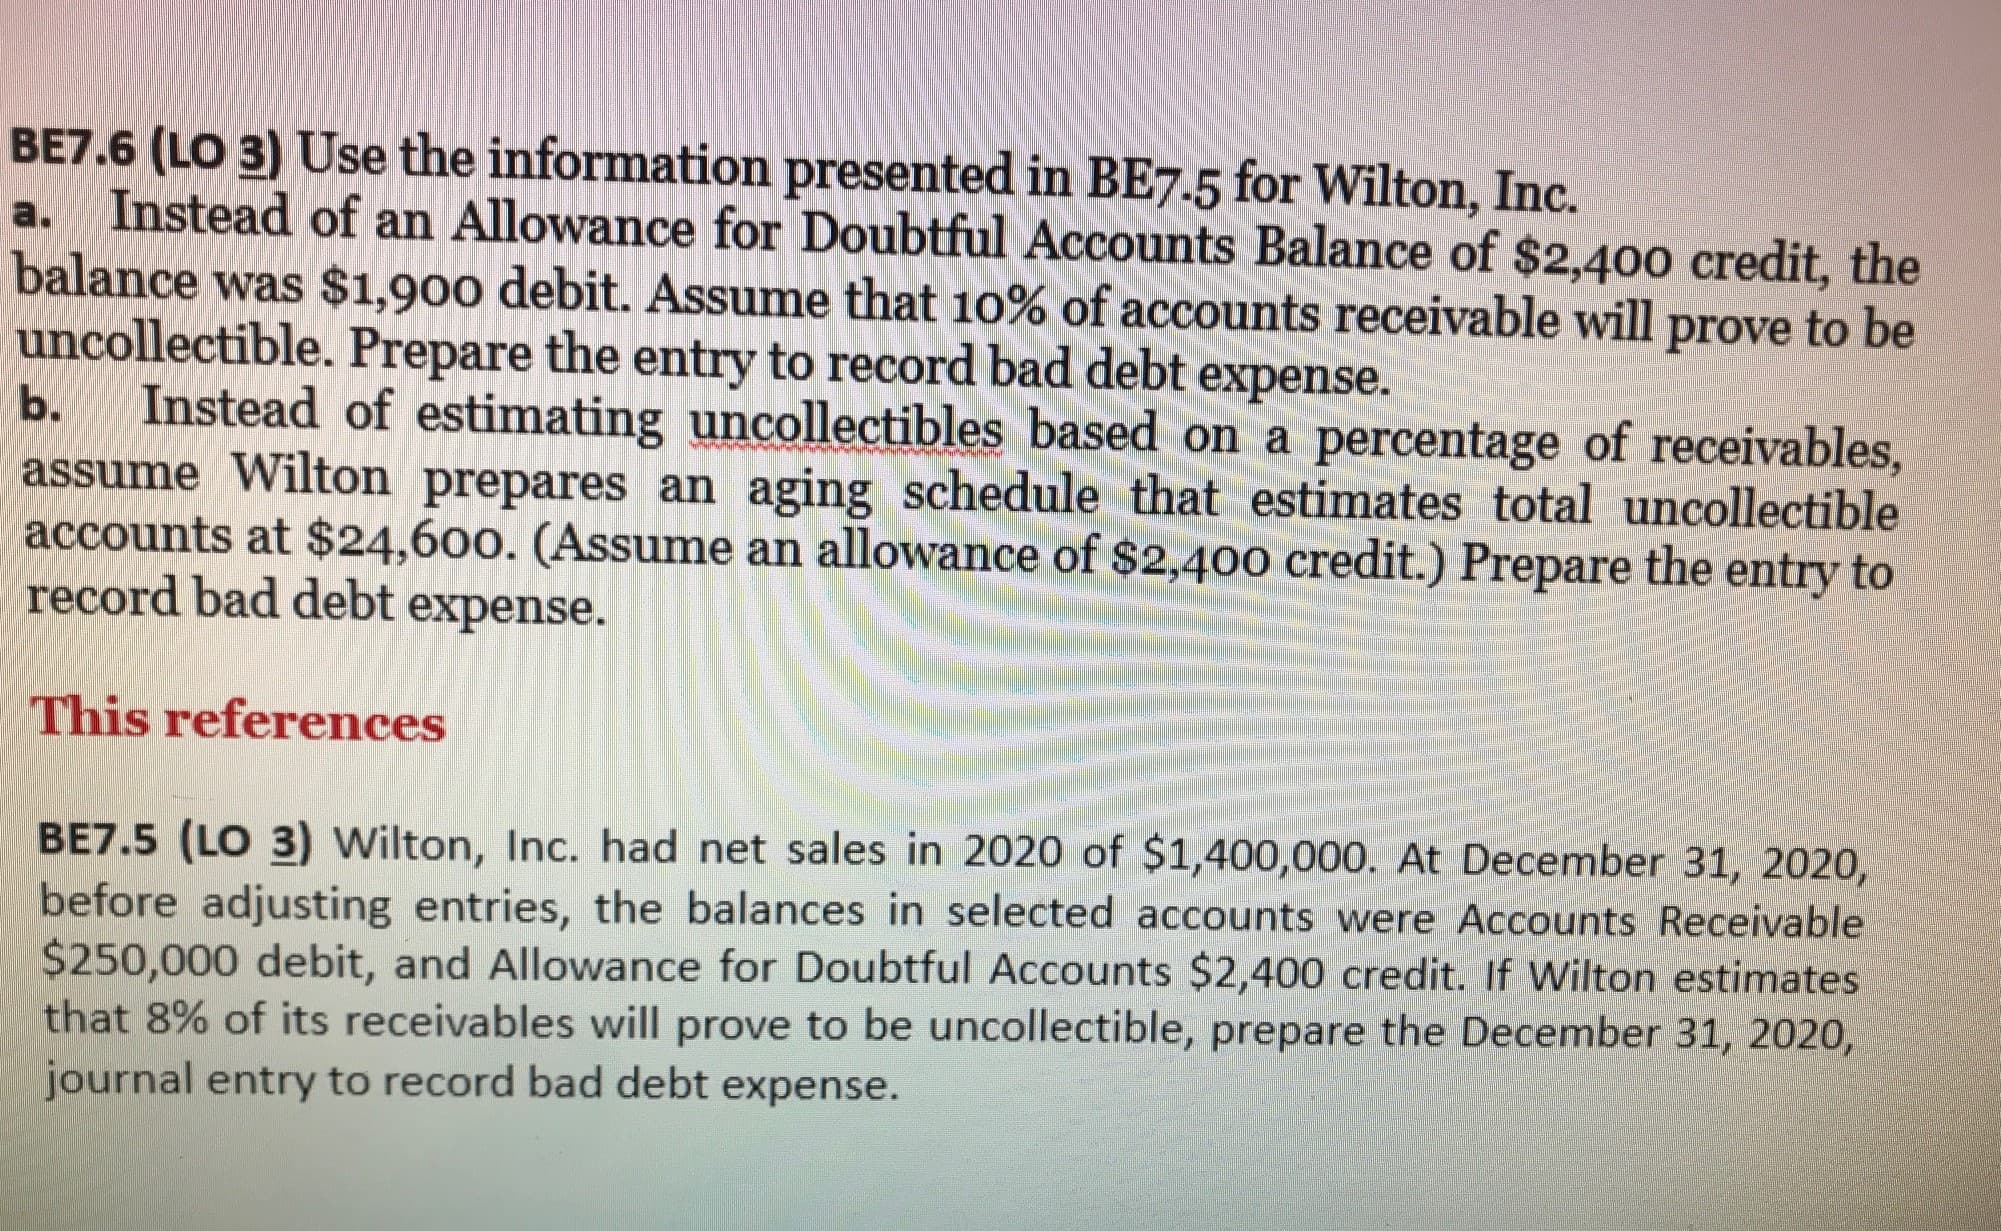 BE7.6 (LO 3) Use the information presented in BE7.5 for Wilton, Inc.
a. Instead of an Allowance for Doubtful Accounts Balance of $2,400 credit, the
balance was $1,900 debit. Assume that 10% of accounts receivable will prove to be
uncollectible. Prepare the entry to record bad debt expense.
Instead of estimating uncollectibles based on a percentage of receivables,
assume Wilton prepares an aging schedule that estimates total uncollectible
accounts at $24,600. (Assume an allowance of $2,400 credit.) Prepare the entry to
record bad debt expense.
ь.
This references
BE7.5 (LO 3) Wilton, Inc. had net sales in 2020 of $1,400,000. At December 31, 2020,
before adjusting entries, the balances in selected accounts were Accounts Receivable
$250,000 debit, and Allowance for Doubtful Accounts $2,400 credit. If Wilton estimates
that 8% of its receivables will prove to be uncollectible, prepare the December 31, 2020,
journal entry to record bad debt expense.
